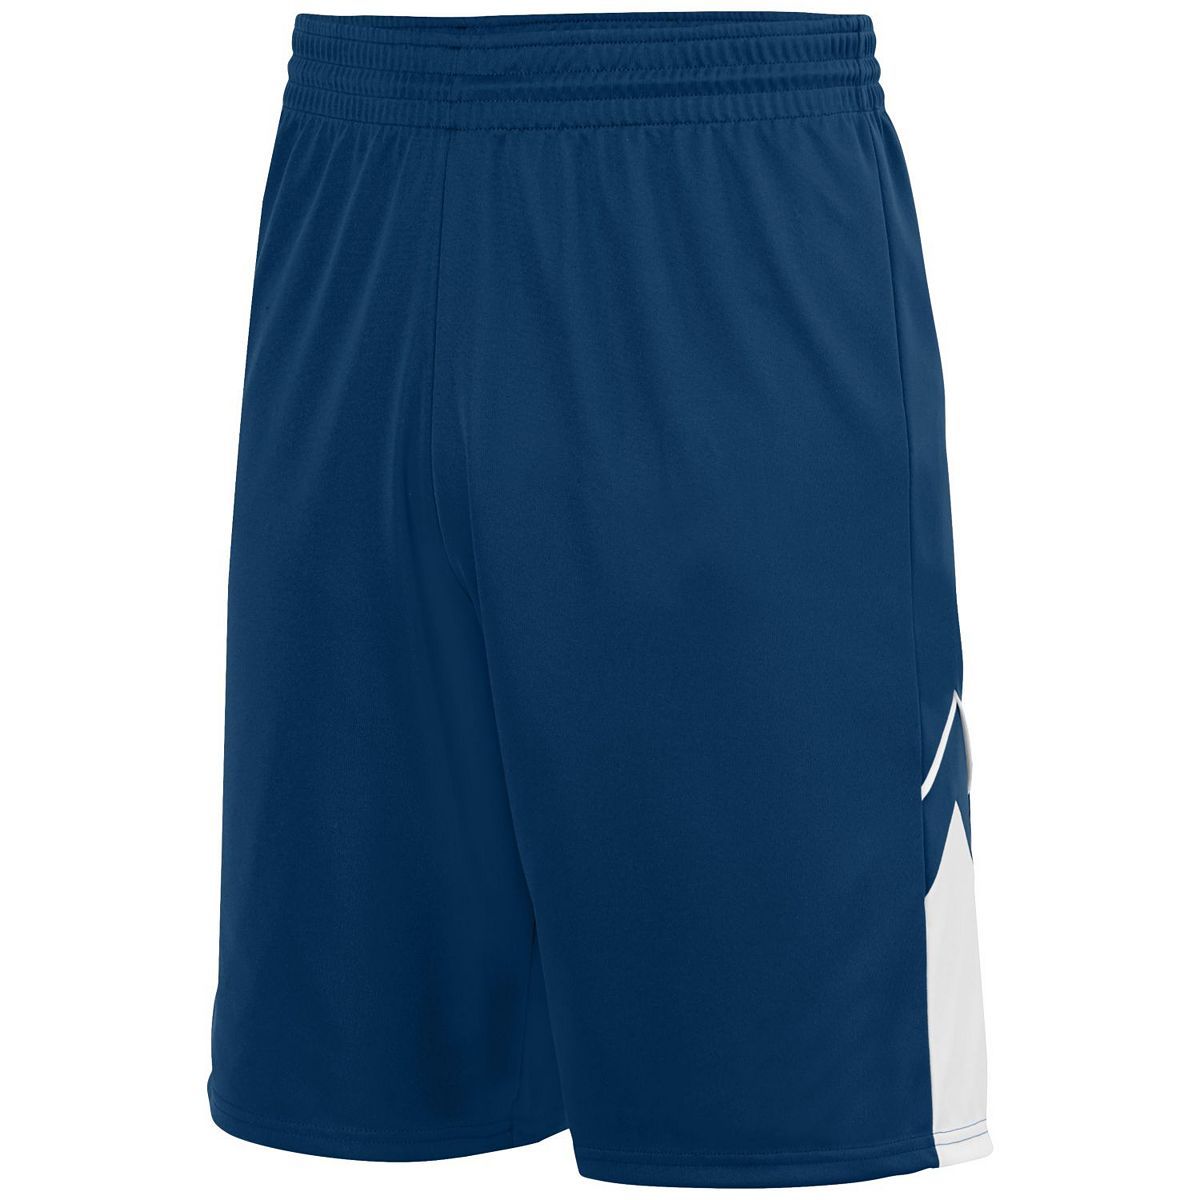 Augusta Sportswear Alley-Oop Reversible Shorts in Navy/White  -Part of the Adult, Adult-Shorts, Augusta-Products, Basketball, All-Sports, All-Sports-1 product lines at KanaleyCreations.com